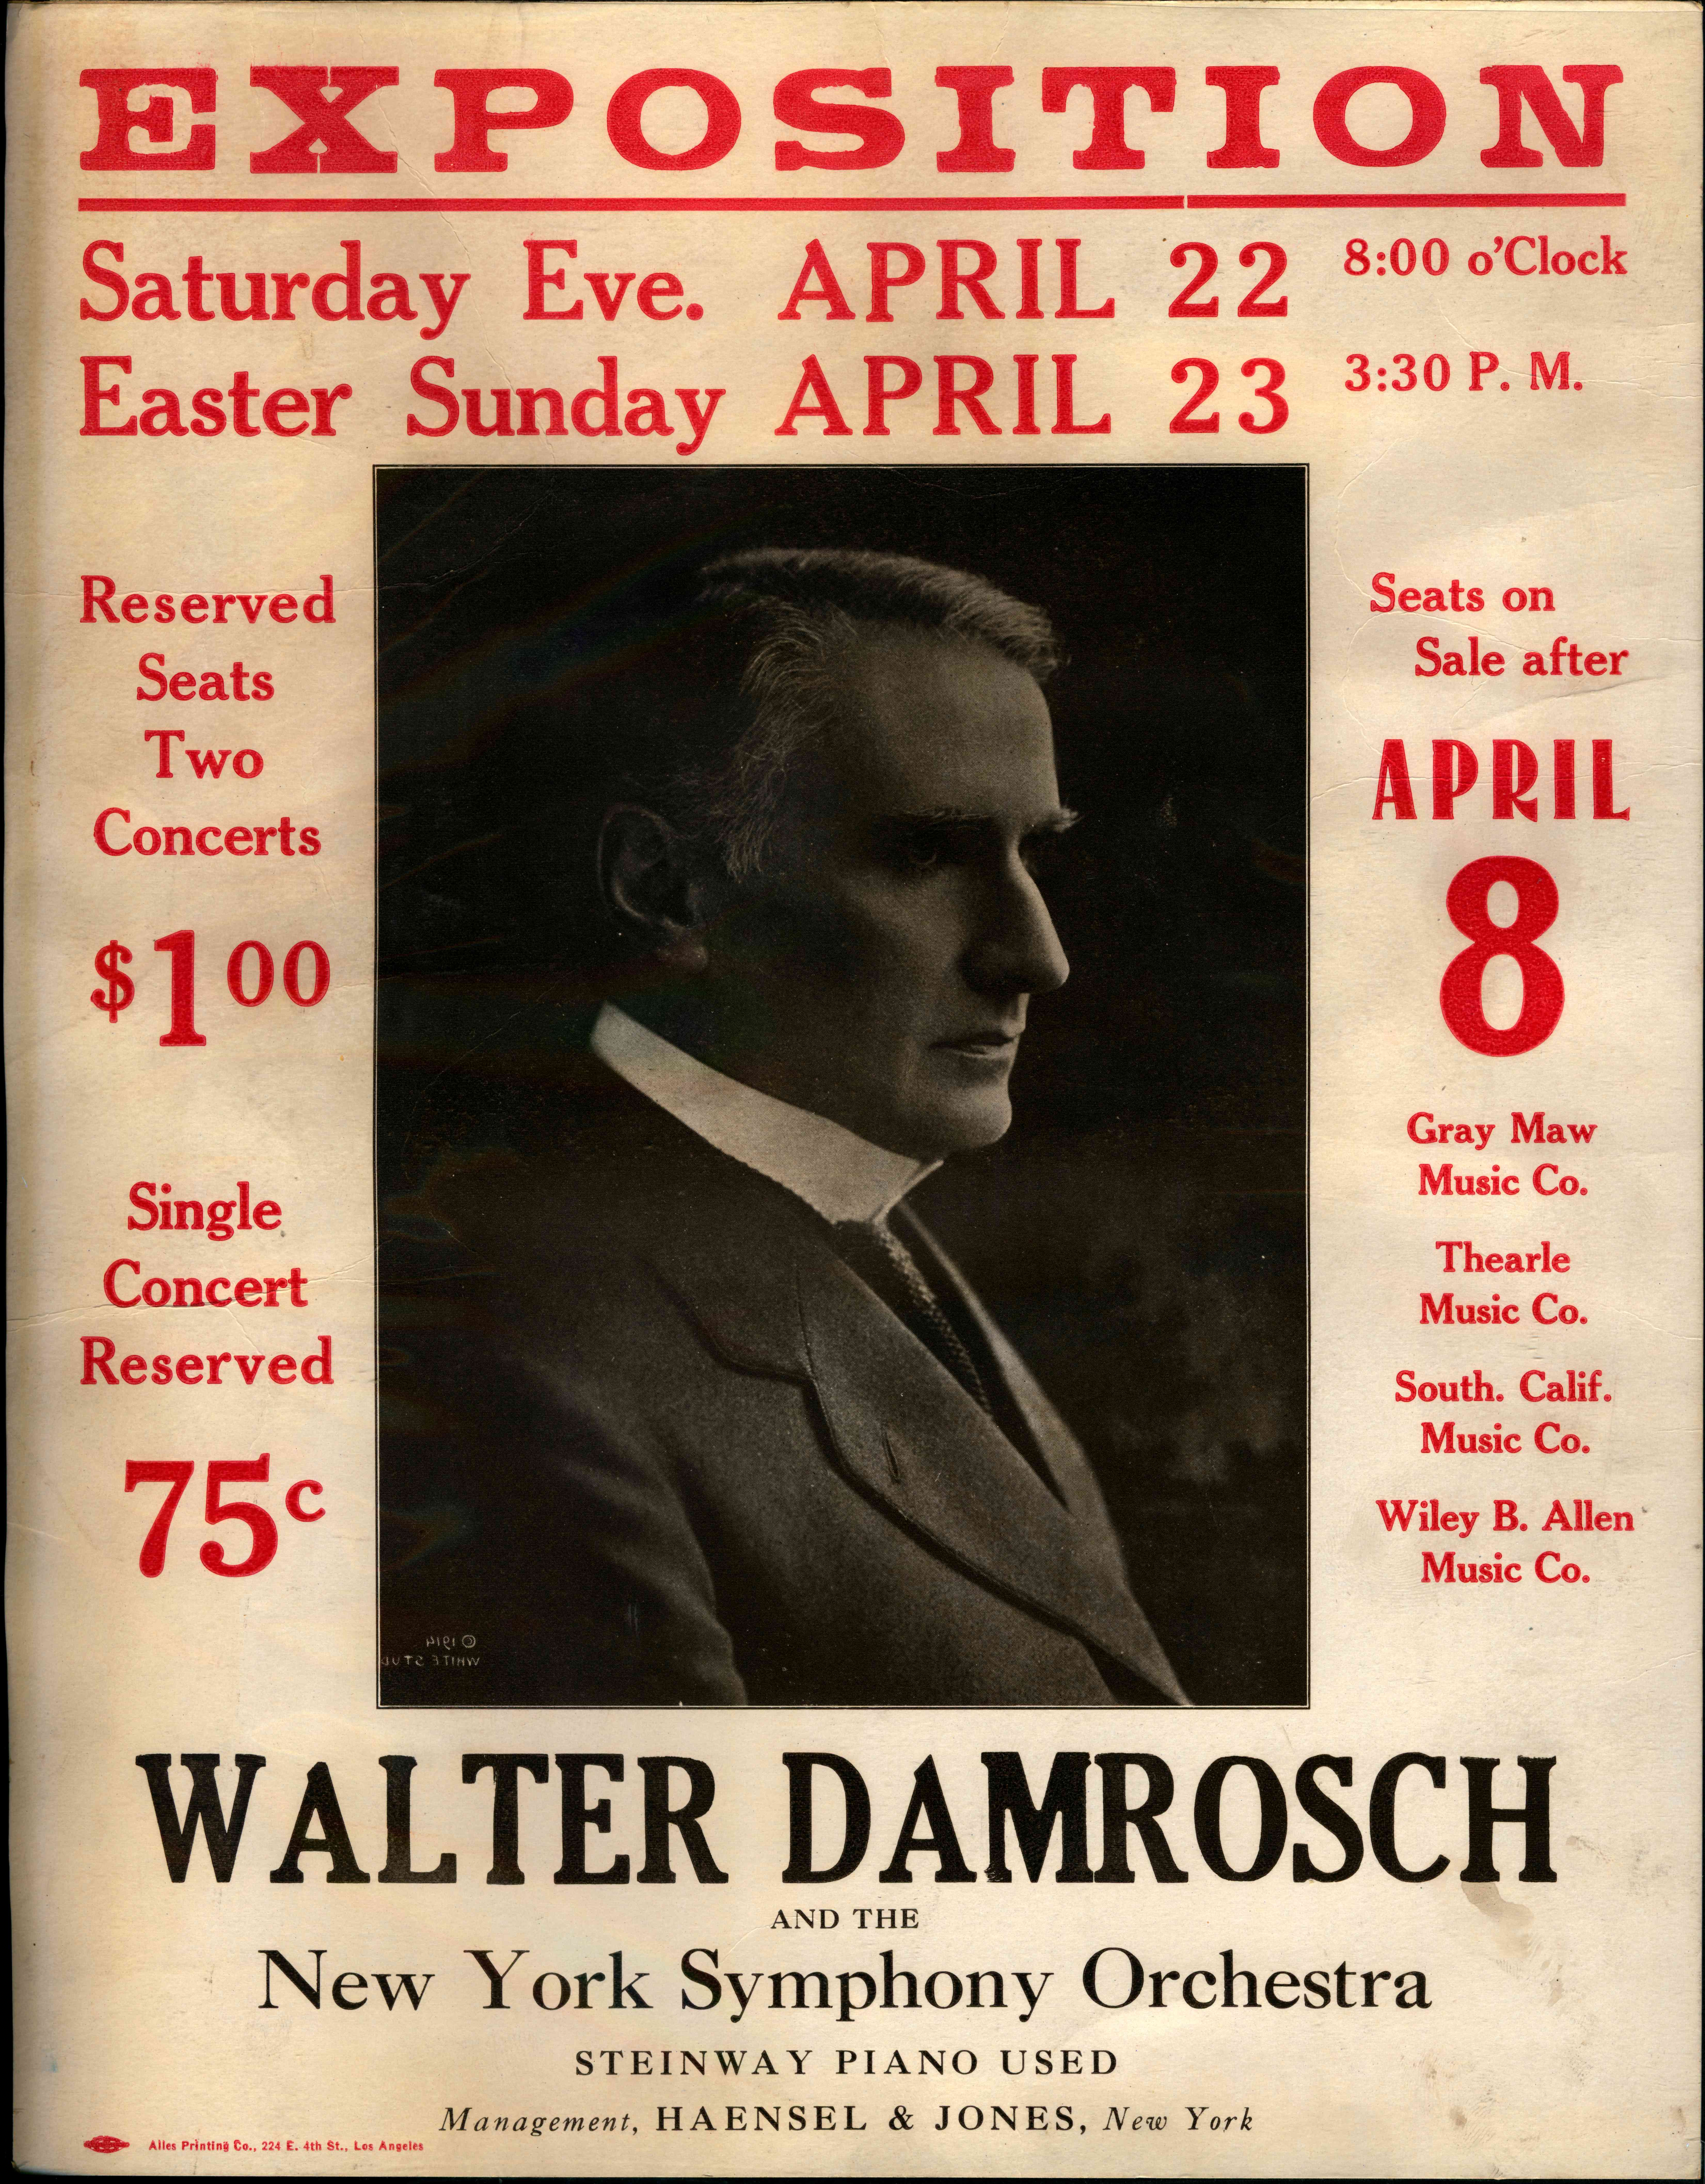 A picture of Walter Damrosch in the middle of the page